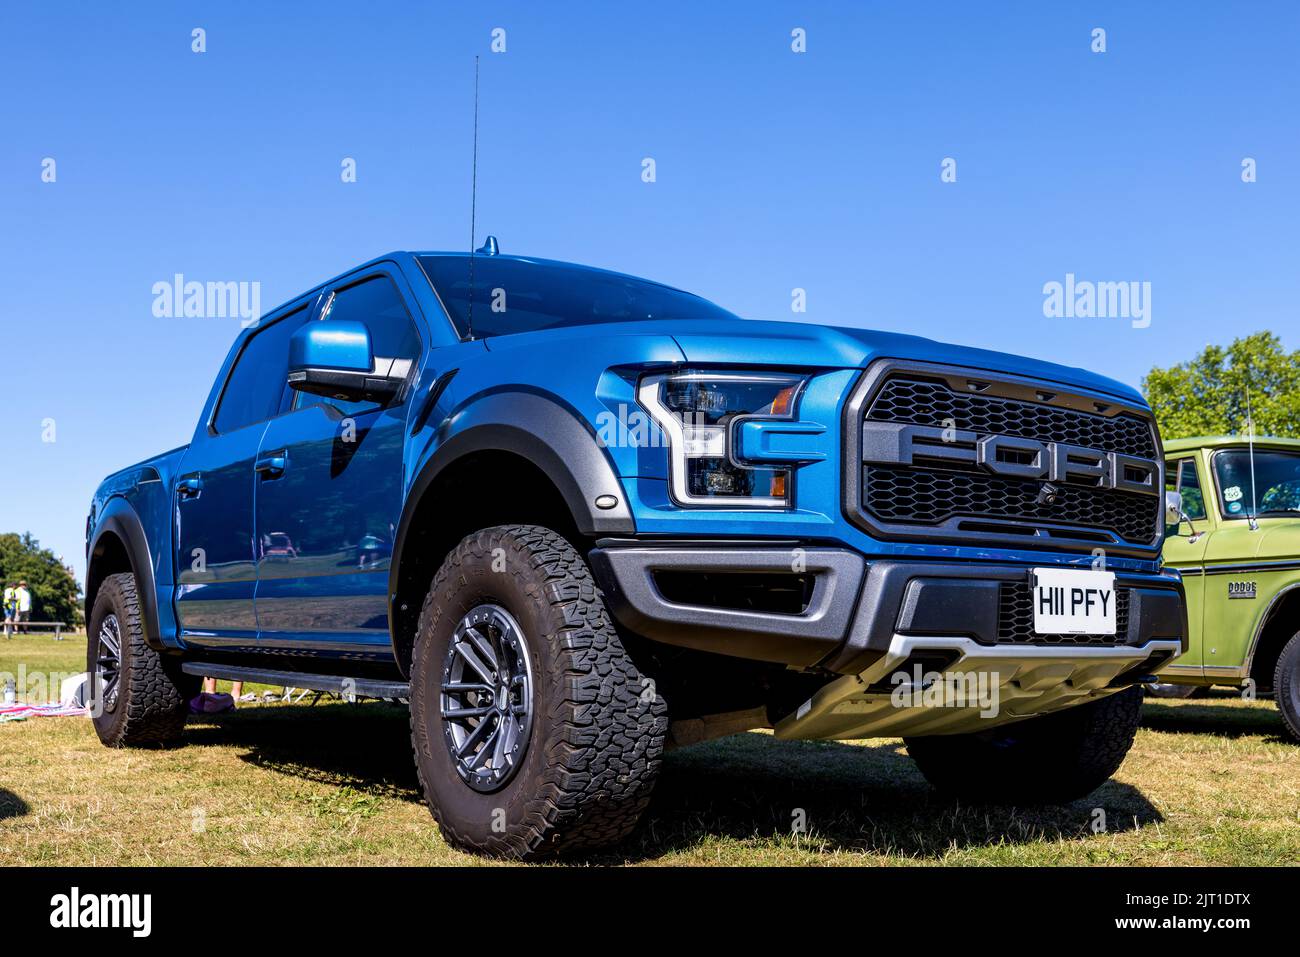 Ford Raptor pick-up truck, on display at the American Auto Club Rally of the Giants, held at Blenheim Palace on the 10 July 2022 Stock Photo